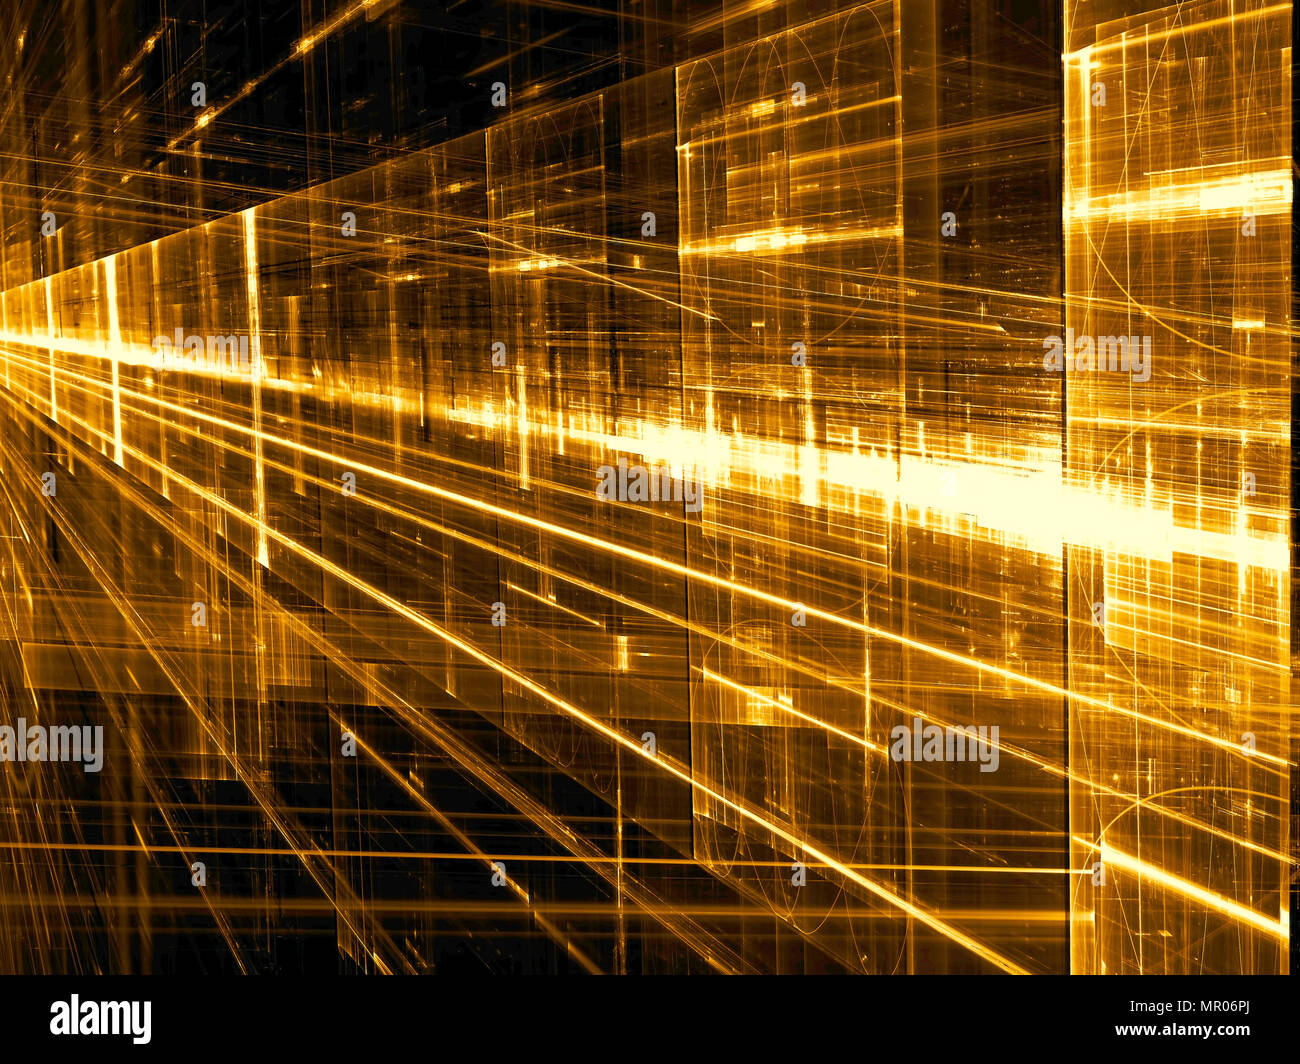 Golden background with glossy surface, perspective and rays. Abstract computer-generated image. For web design, covers, poster. Sci-fi or vr concept. Stock Photo